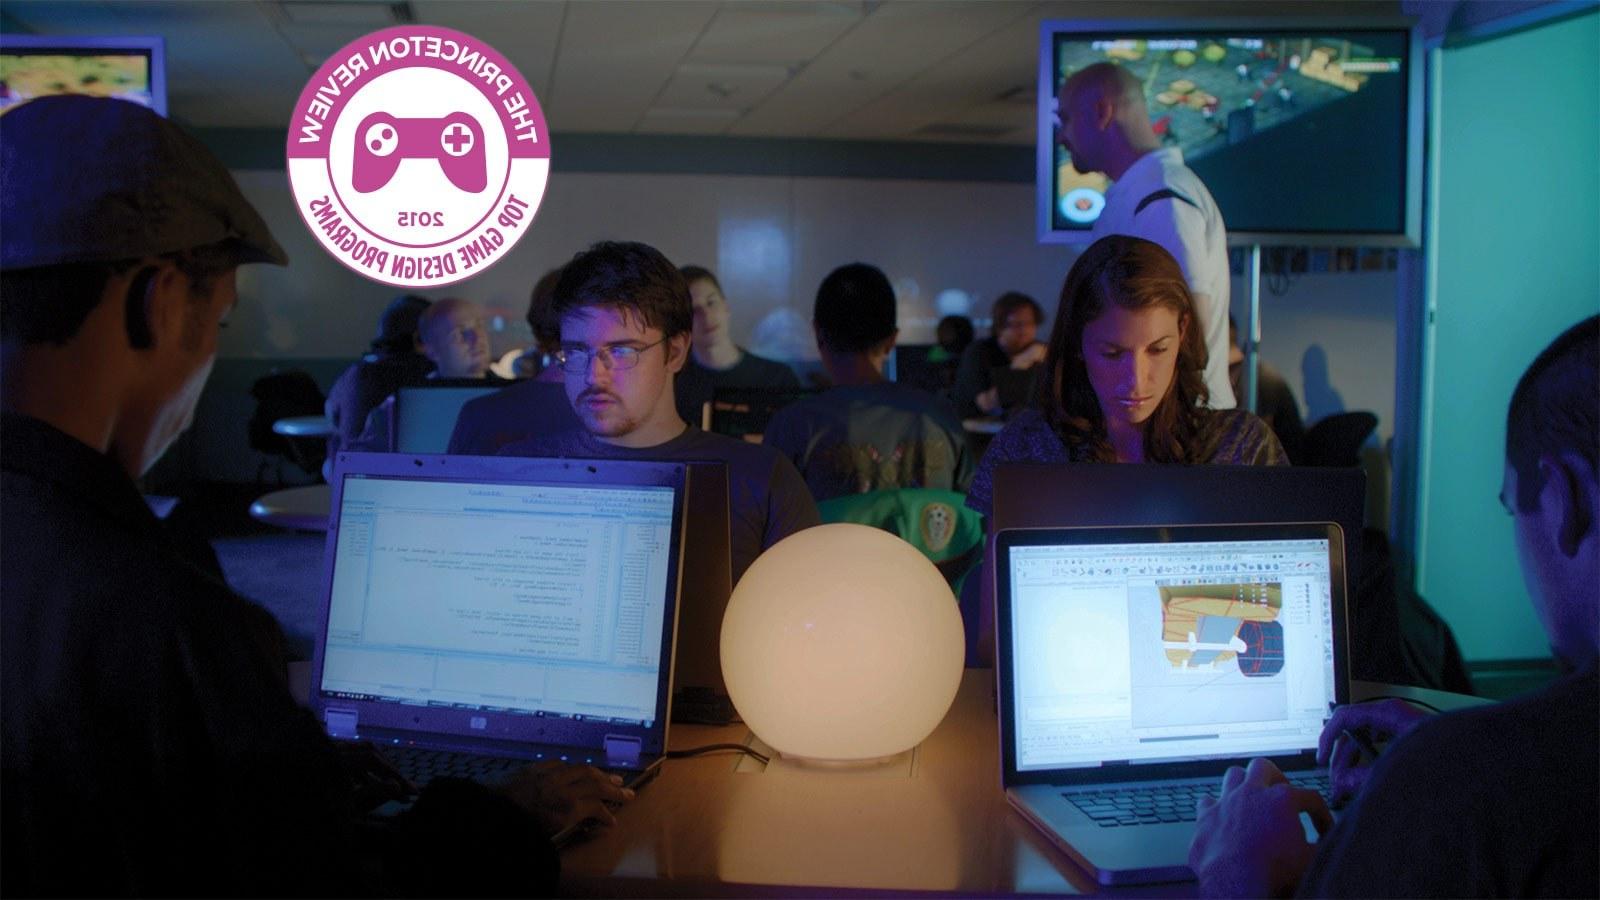 Full Sail Named Top School for Game Design by The Princeton Review - Hero image 